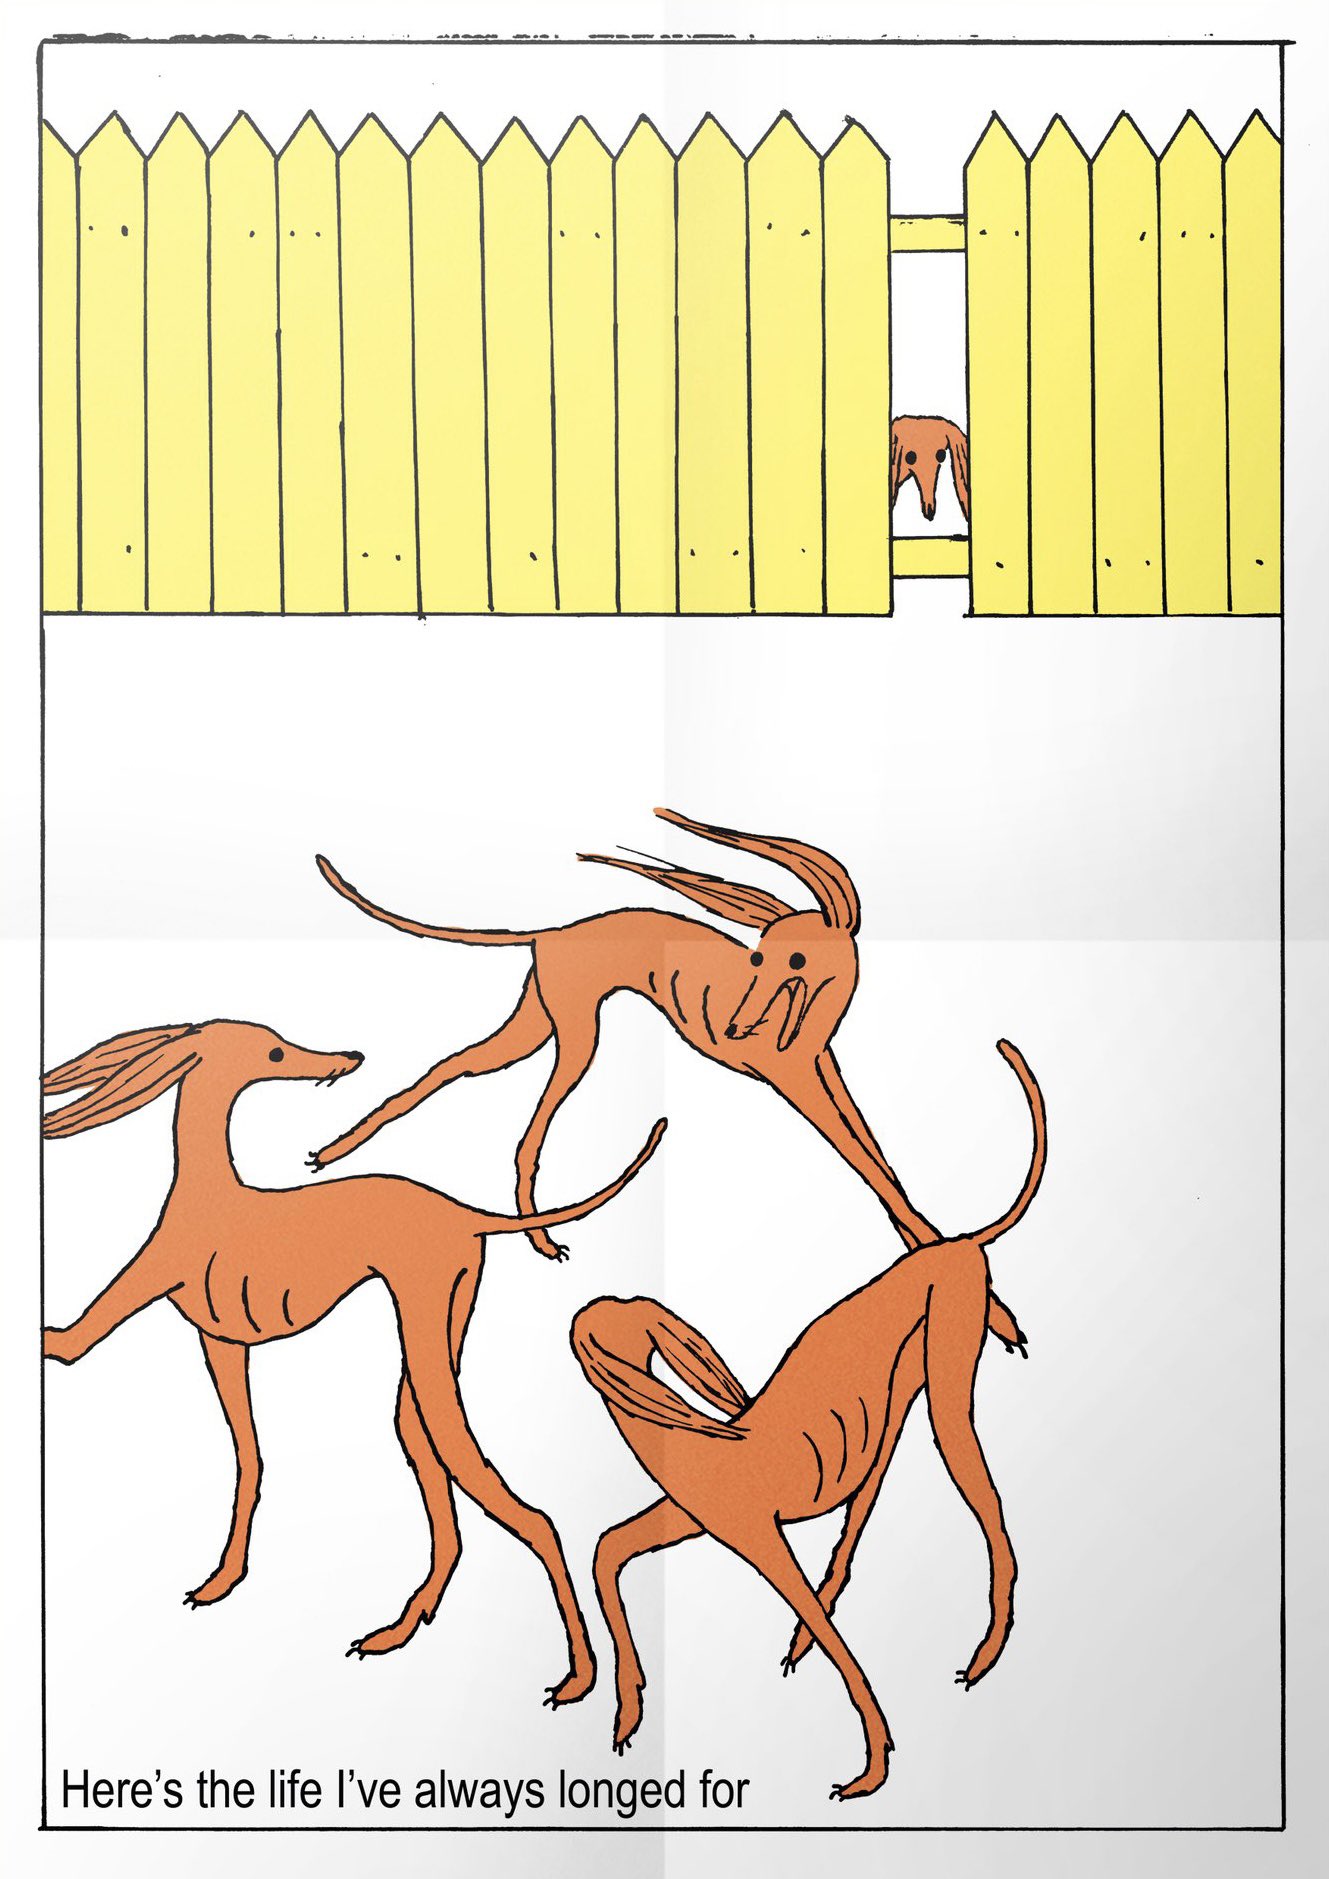 Three orange dogs chase each other in a circle. They're tall, thin dogs with long ears, and look like borzoi or greyhounds. At the top of the image is a yellow fence with one plank missing, where another similar looking dog peeks its head out from behind. While there are no actual facial expressions in the image, the dogs in the front of the picture appear to be having fun and enjoying themselves, with ones mouth open as though laughing and all three of them flinging out their legs as they run. In comparison the dog peering through the fence has no expression and no visible body, bringing attention to its isolation. The image is in a simple sketchy art style, and the background is plain white, stylised to look like a piece of paper that has previously been folded in four. There's a simple black line border about a centimeter from the edge of the picture. In the bottom left corner of the picture, inside of the border, is the sentence Here's the life I've always longed for written in a plain sans serif font, arial or similar.